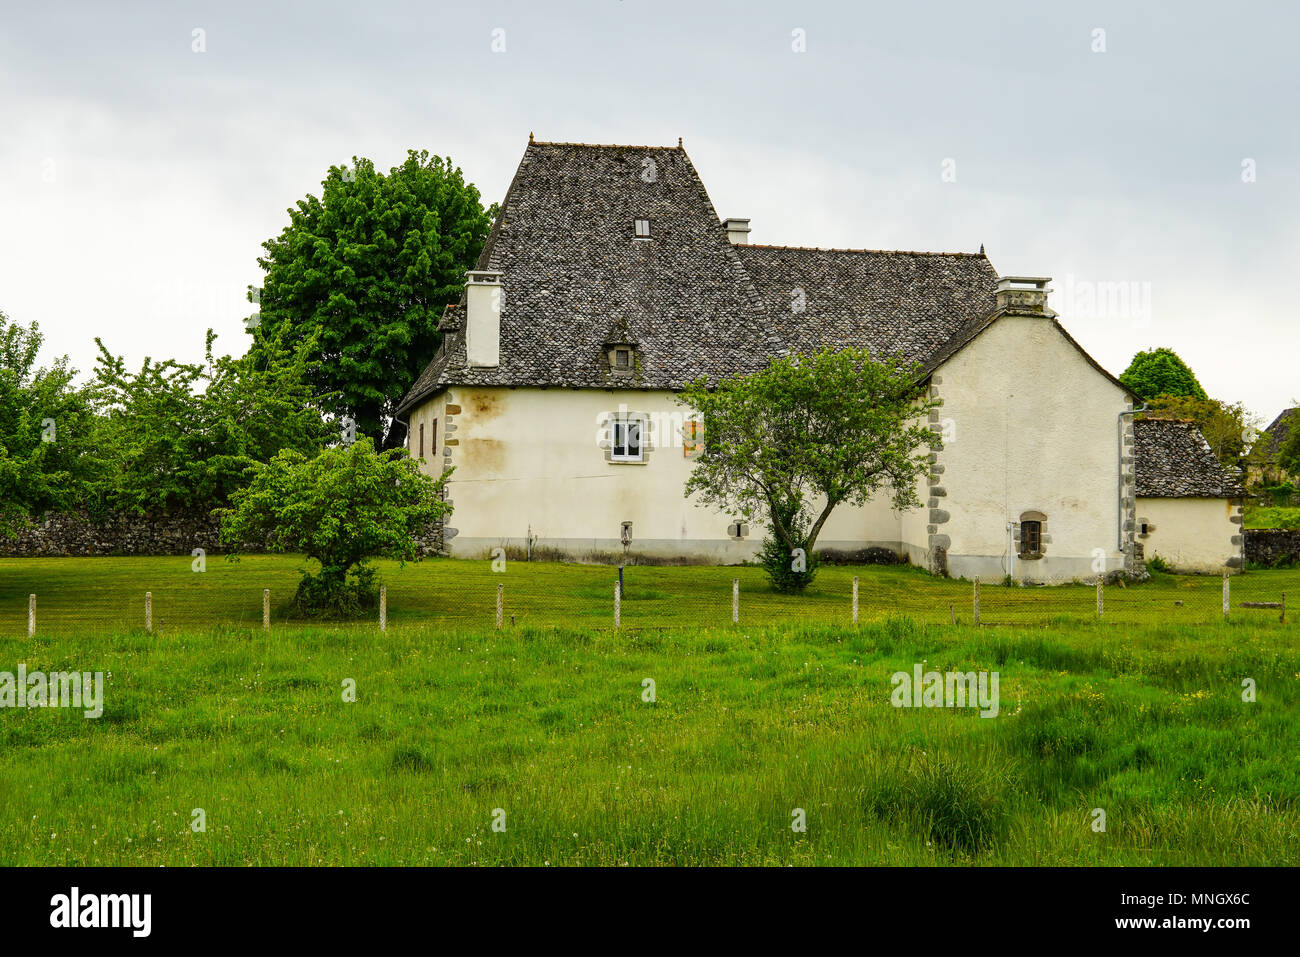 House with slate roof in France, Occitane region. Stock Photo